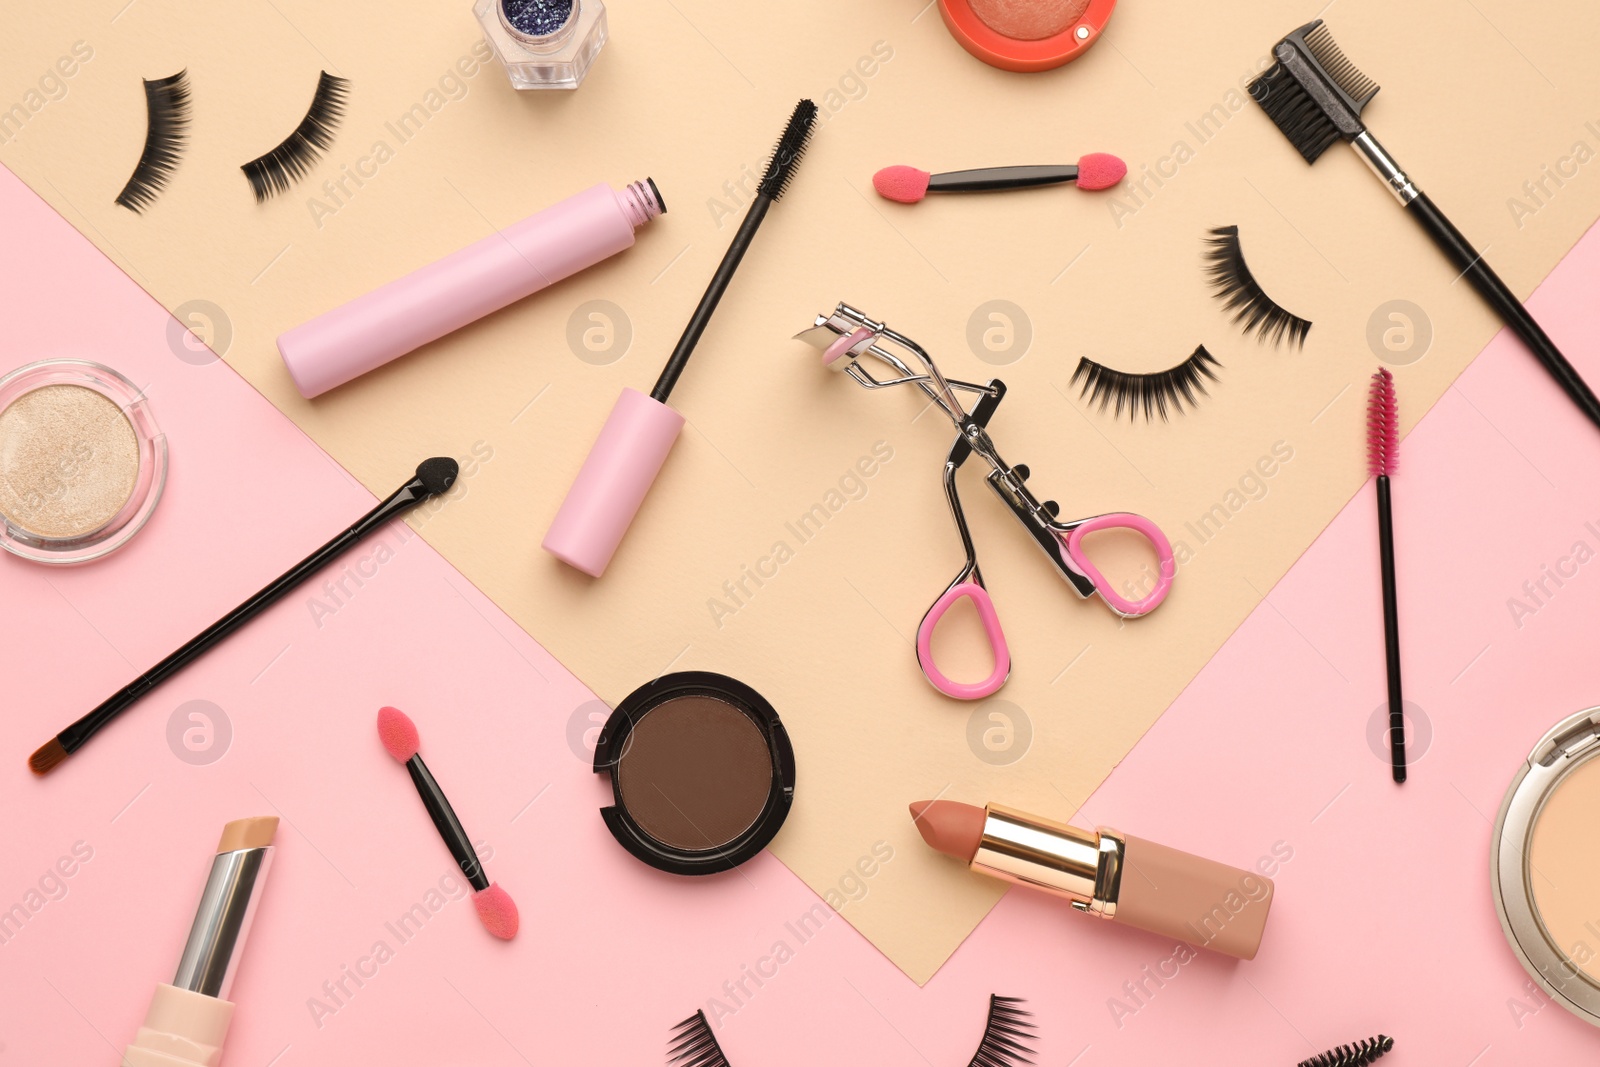 Photo of Flat lay composition with eyelash curler, makeup products and accessories on color background